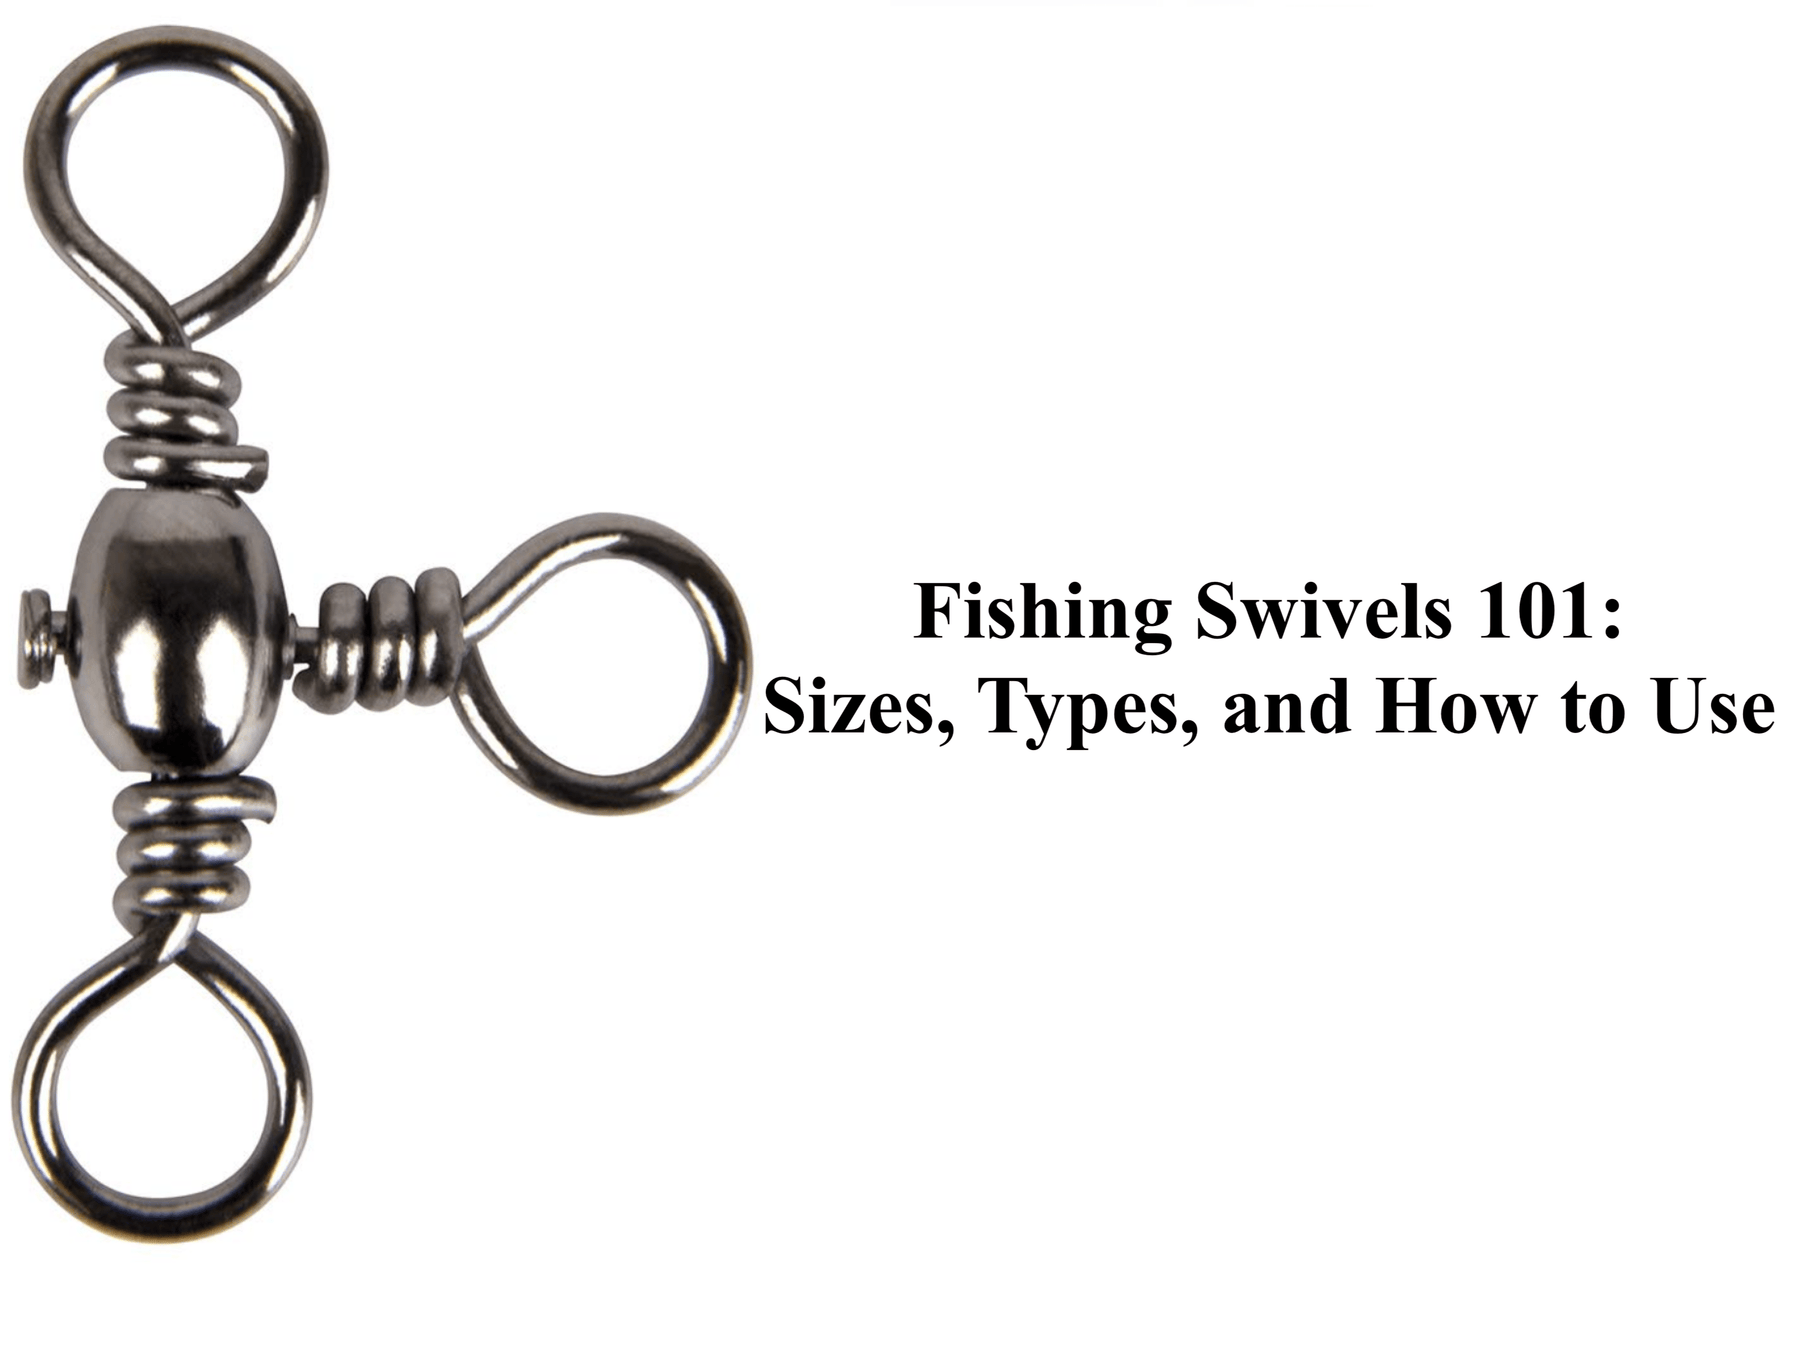 Fishing Swivels 101: Sizes, Types, and How to Use